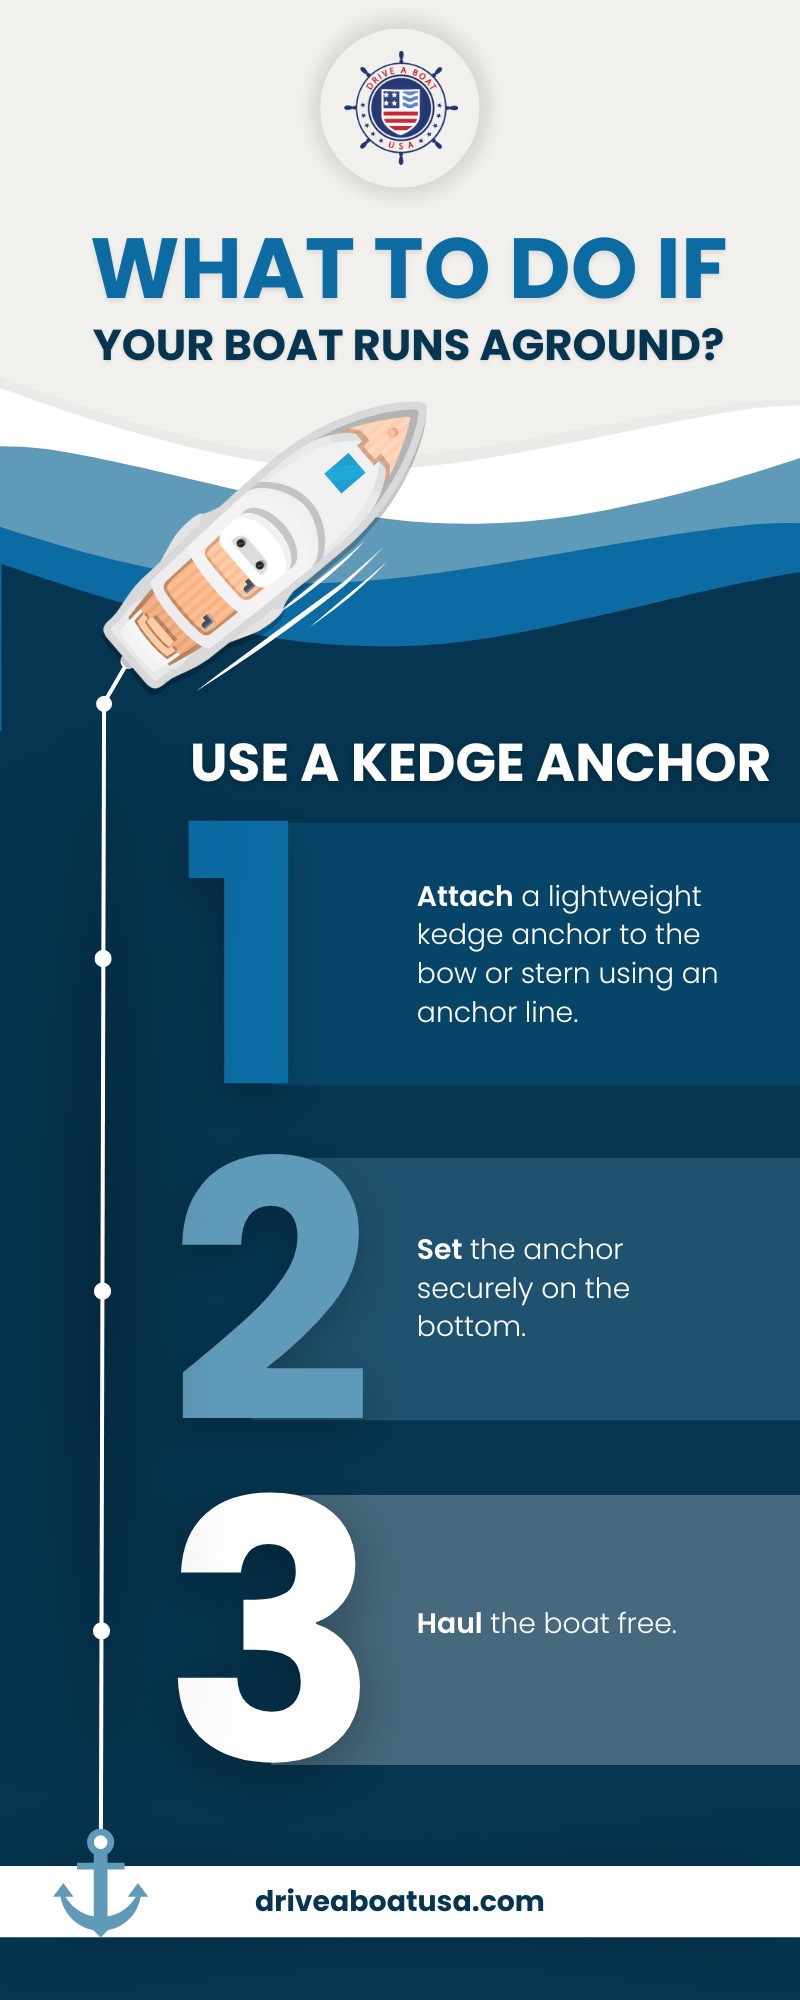 how-to-use-a-kedge-anchor-infographic